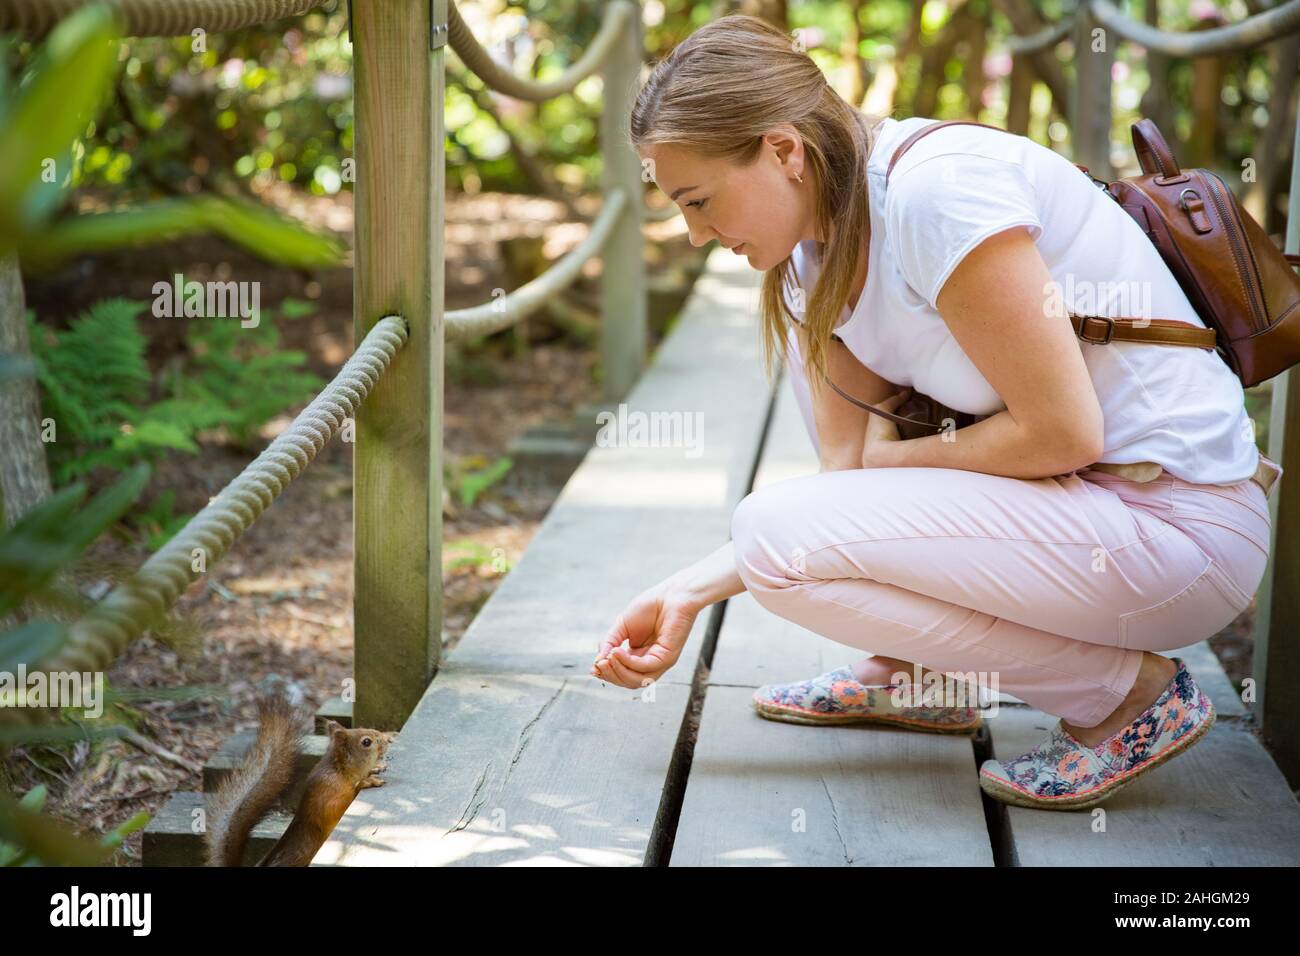 Beautiful woman travel in tropic forest, walking along wooden path, feeding a squirrel. Tourist with backpack. Stock Photo